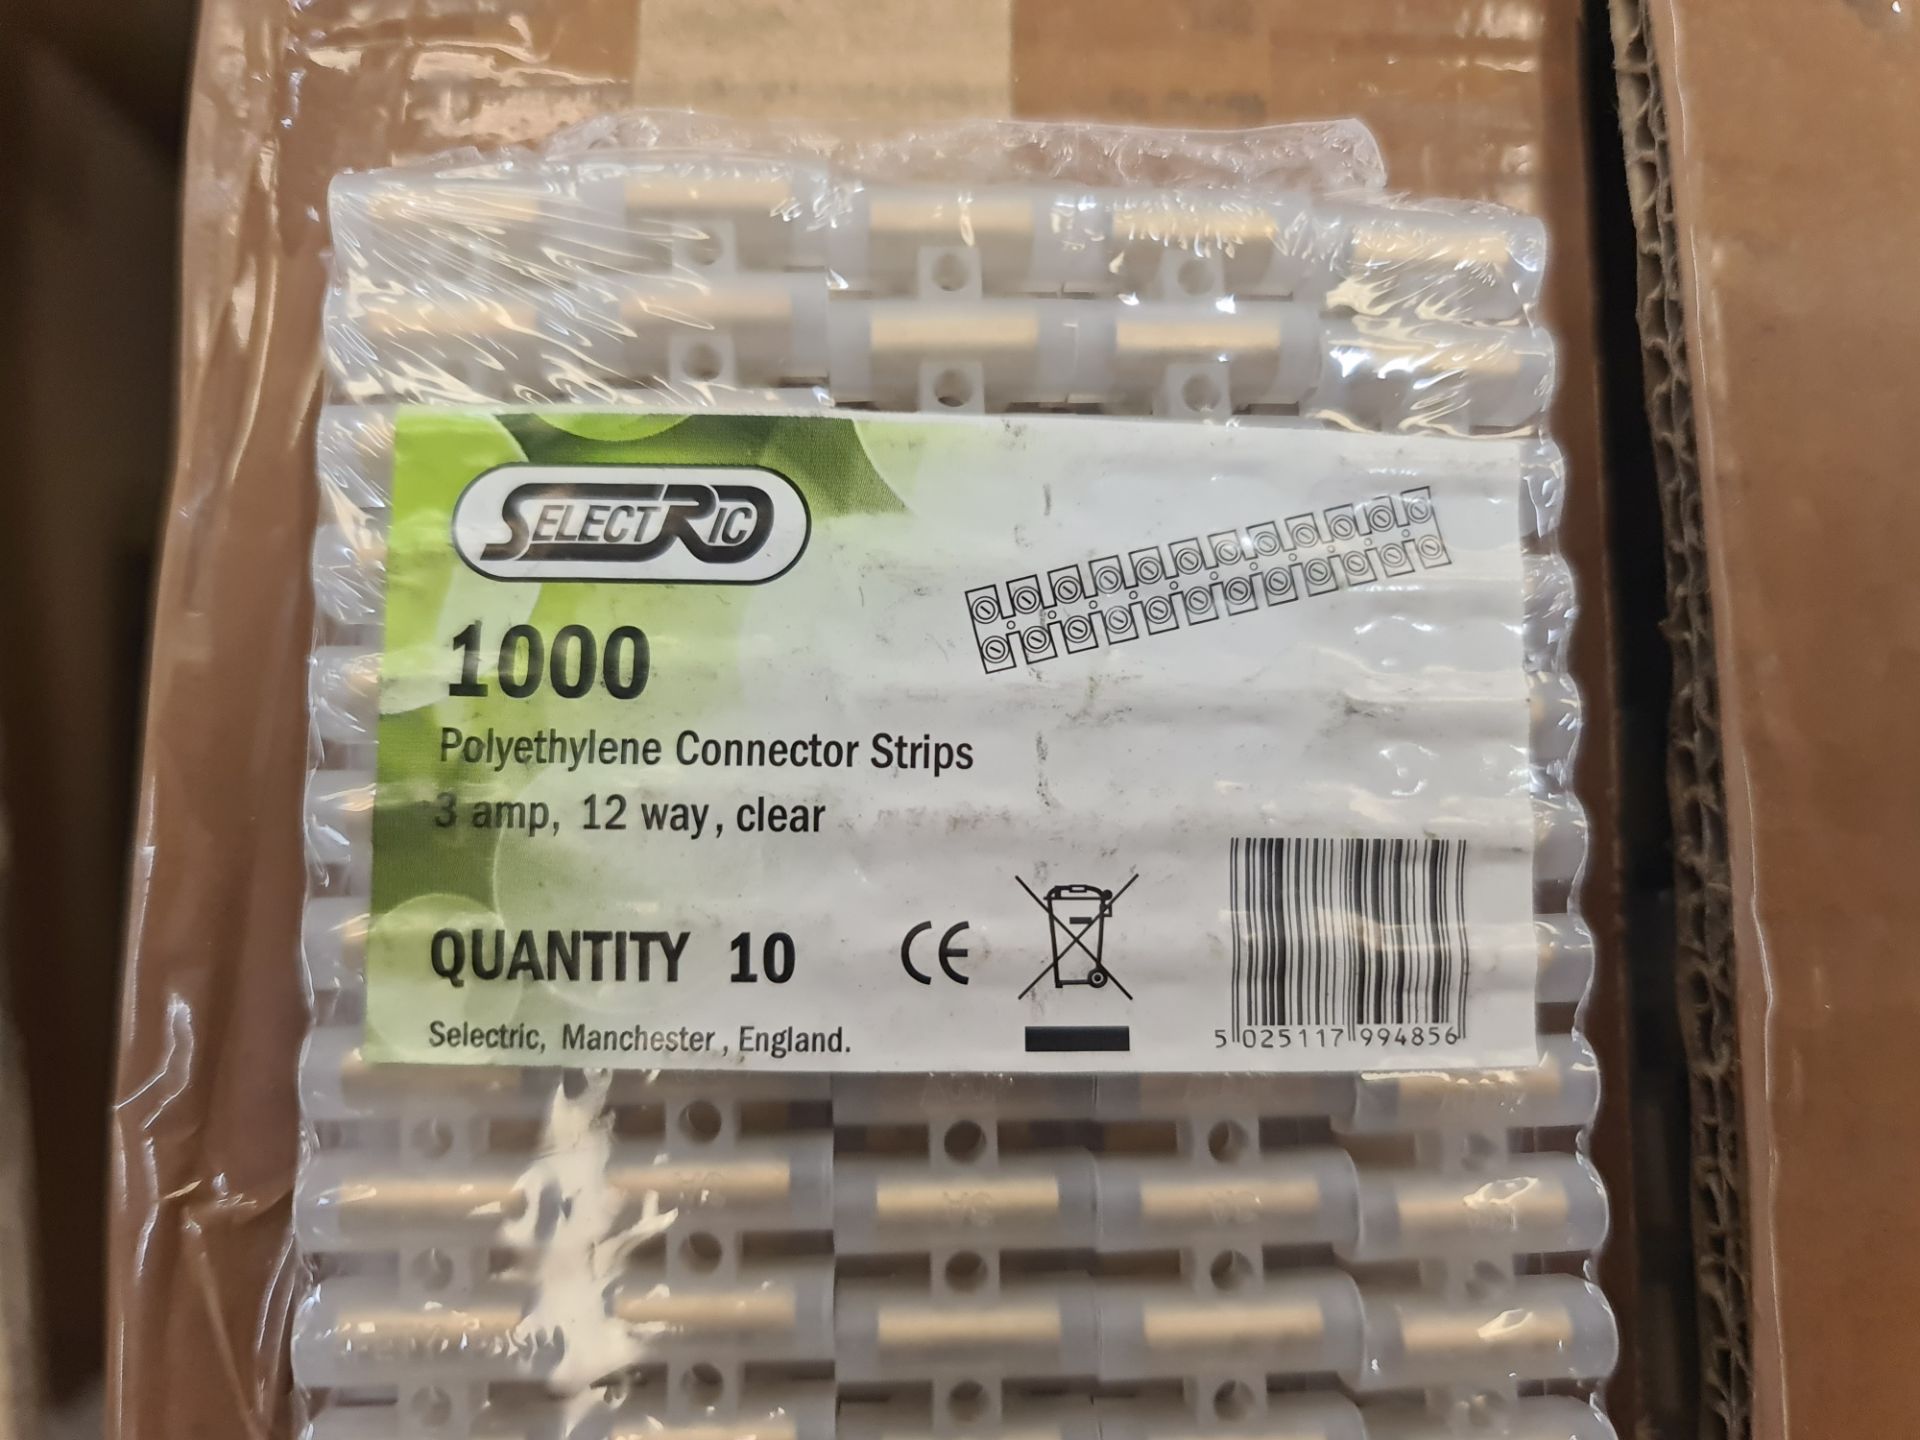 3 boxes of cable connection strips